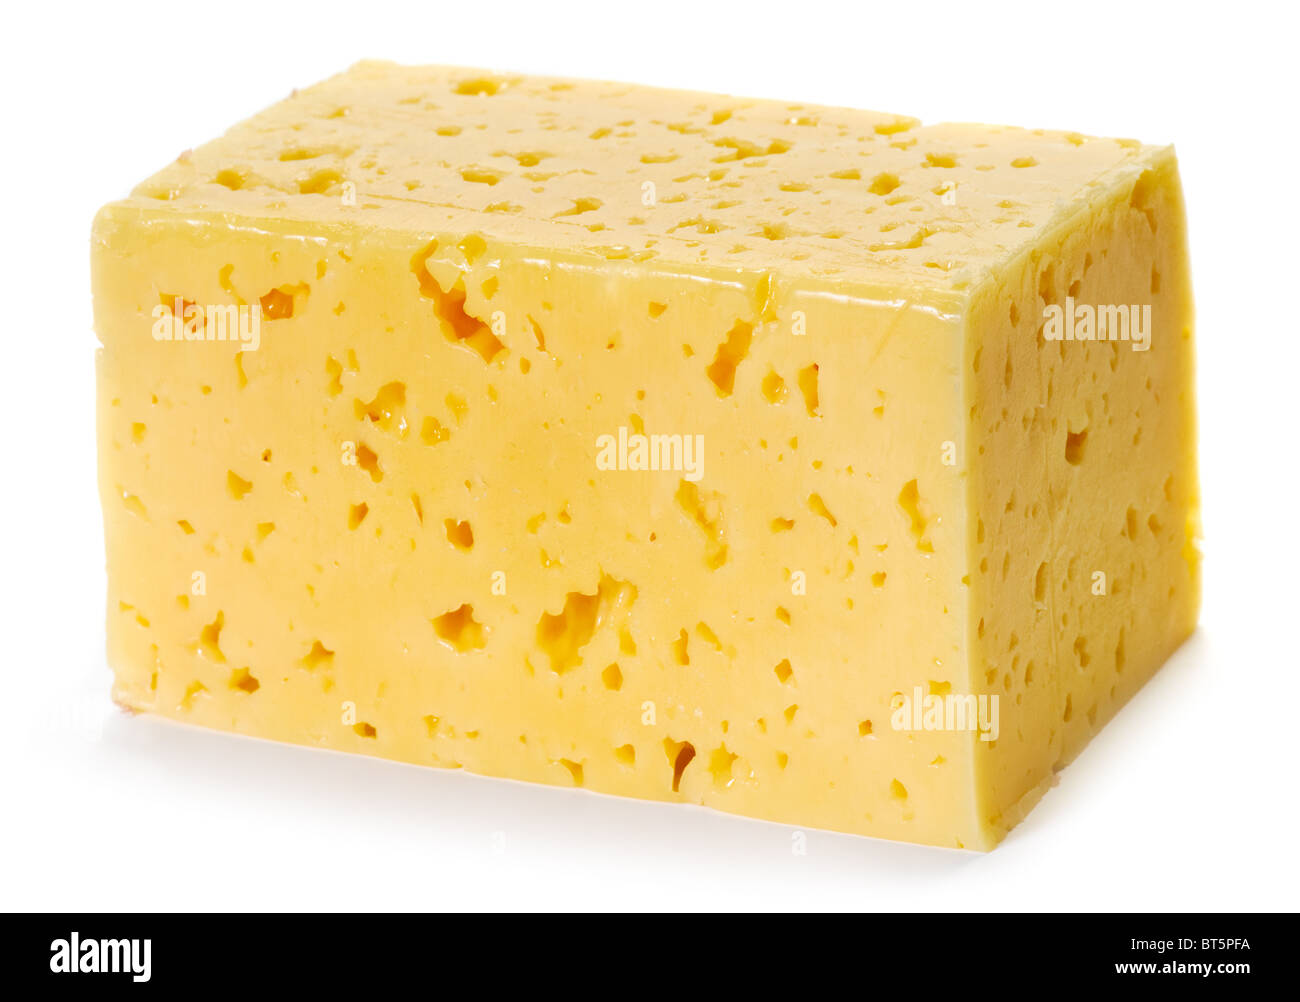 Piece of cheese isolated on white background Stock Photo